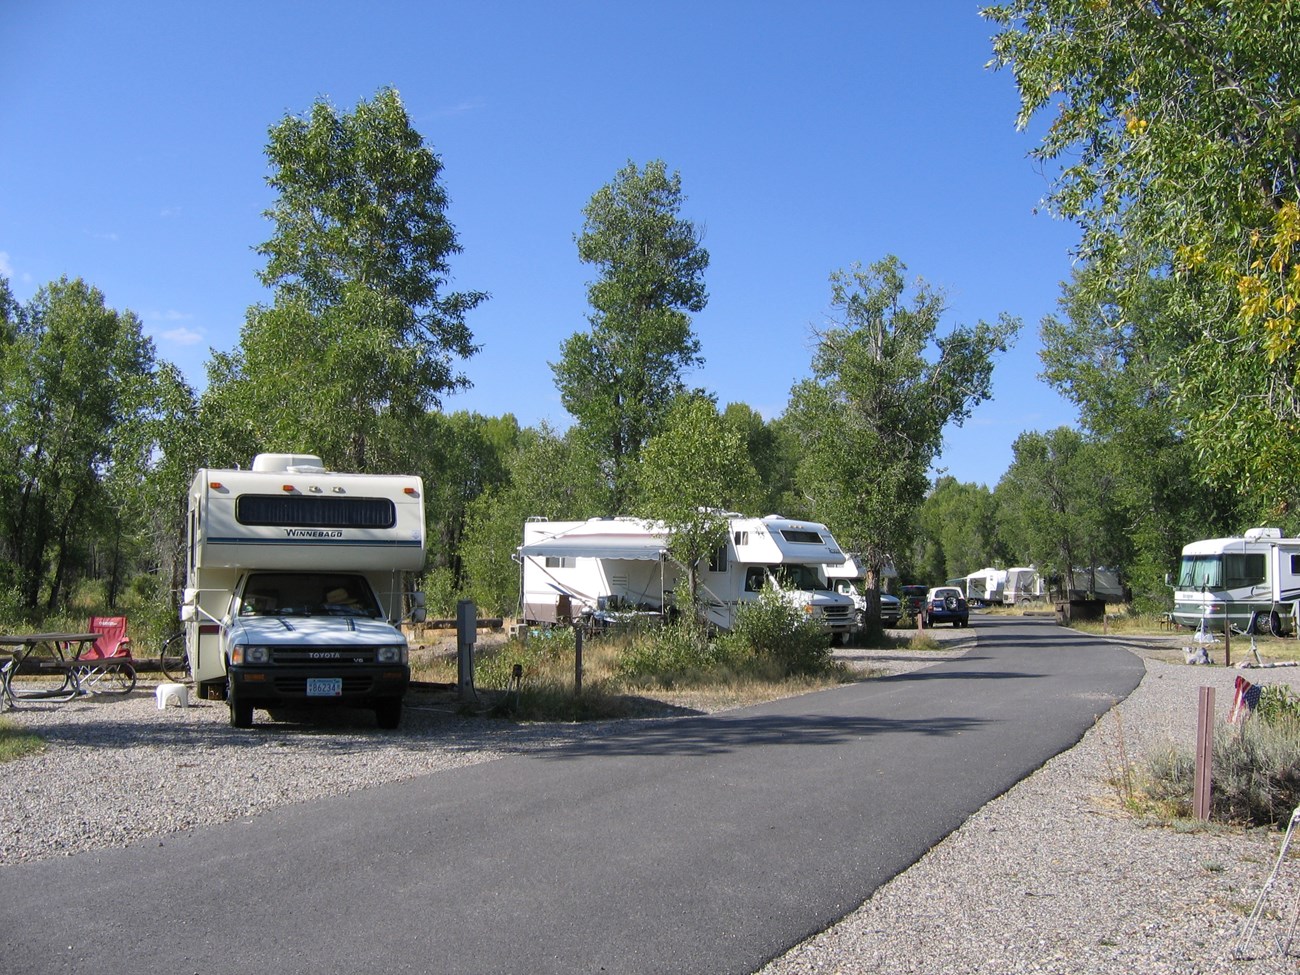 Multiple RV's parked in a campground.